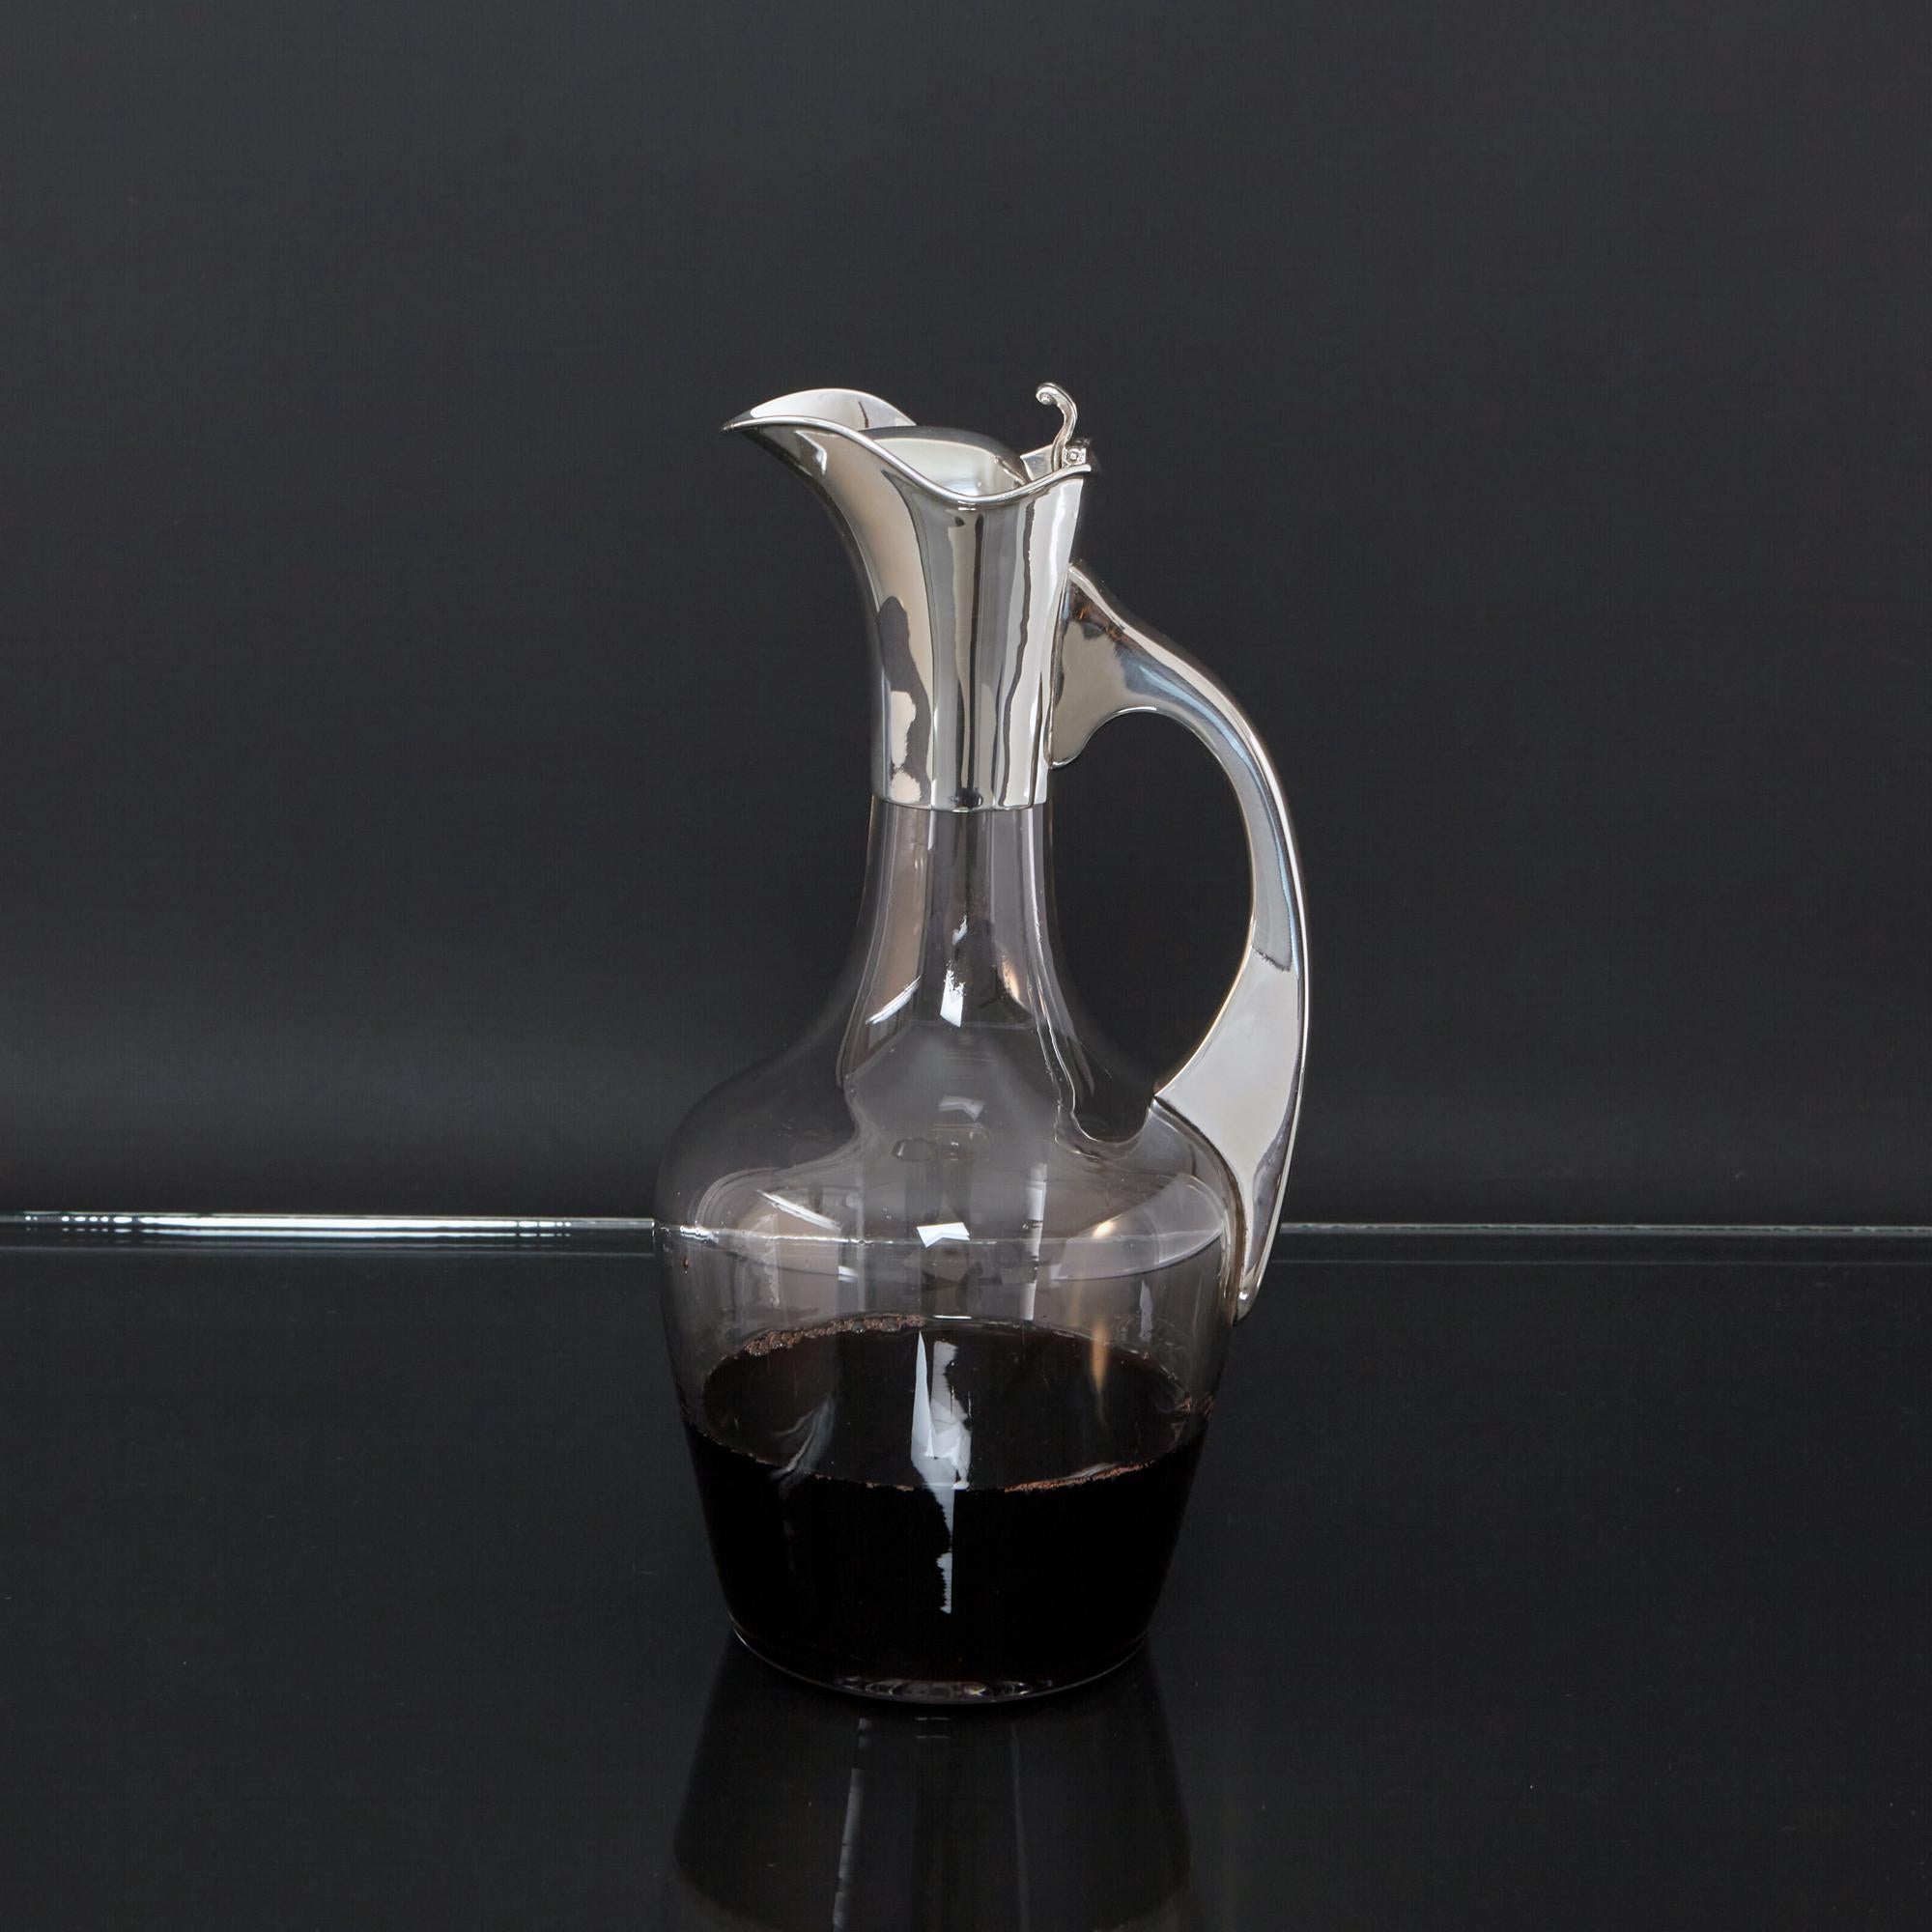 A graceful antique Arts Nouveau style silver and glass wine jug from the Edwardian period at the start of the 20th century. The hand-blown glass body is cut with a starburst pattern on the base, the silver collar, hinged domed cover and tapering